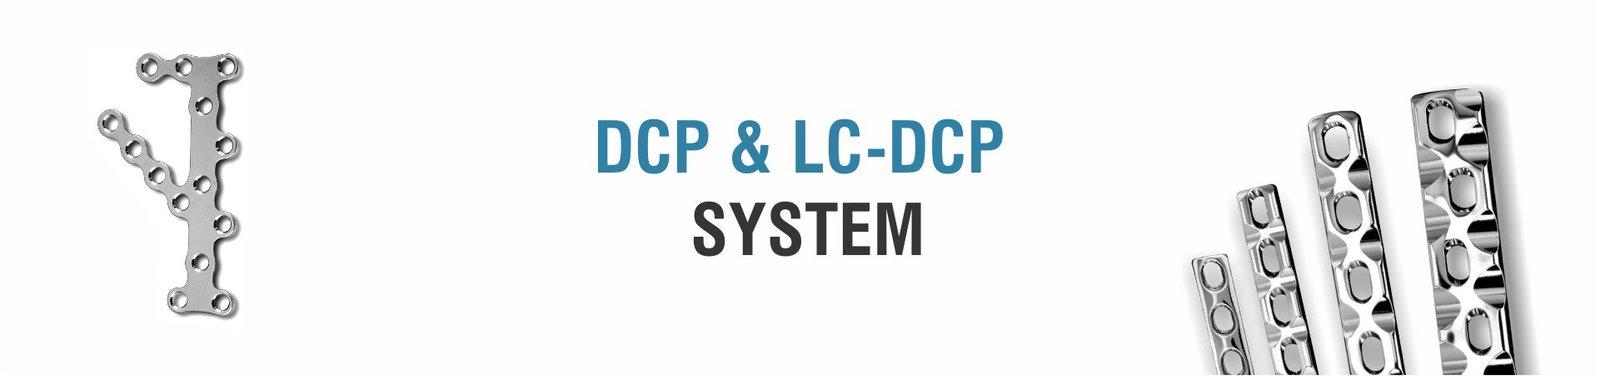 DCP LCP banner